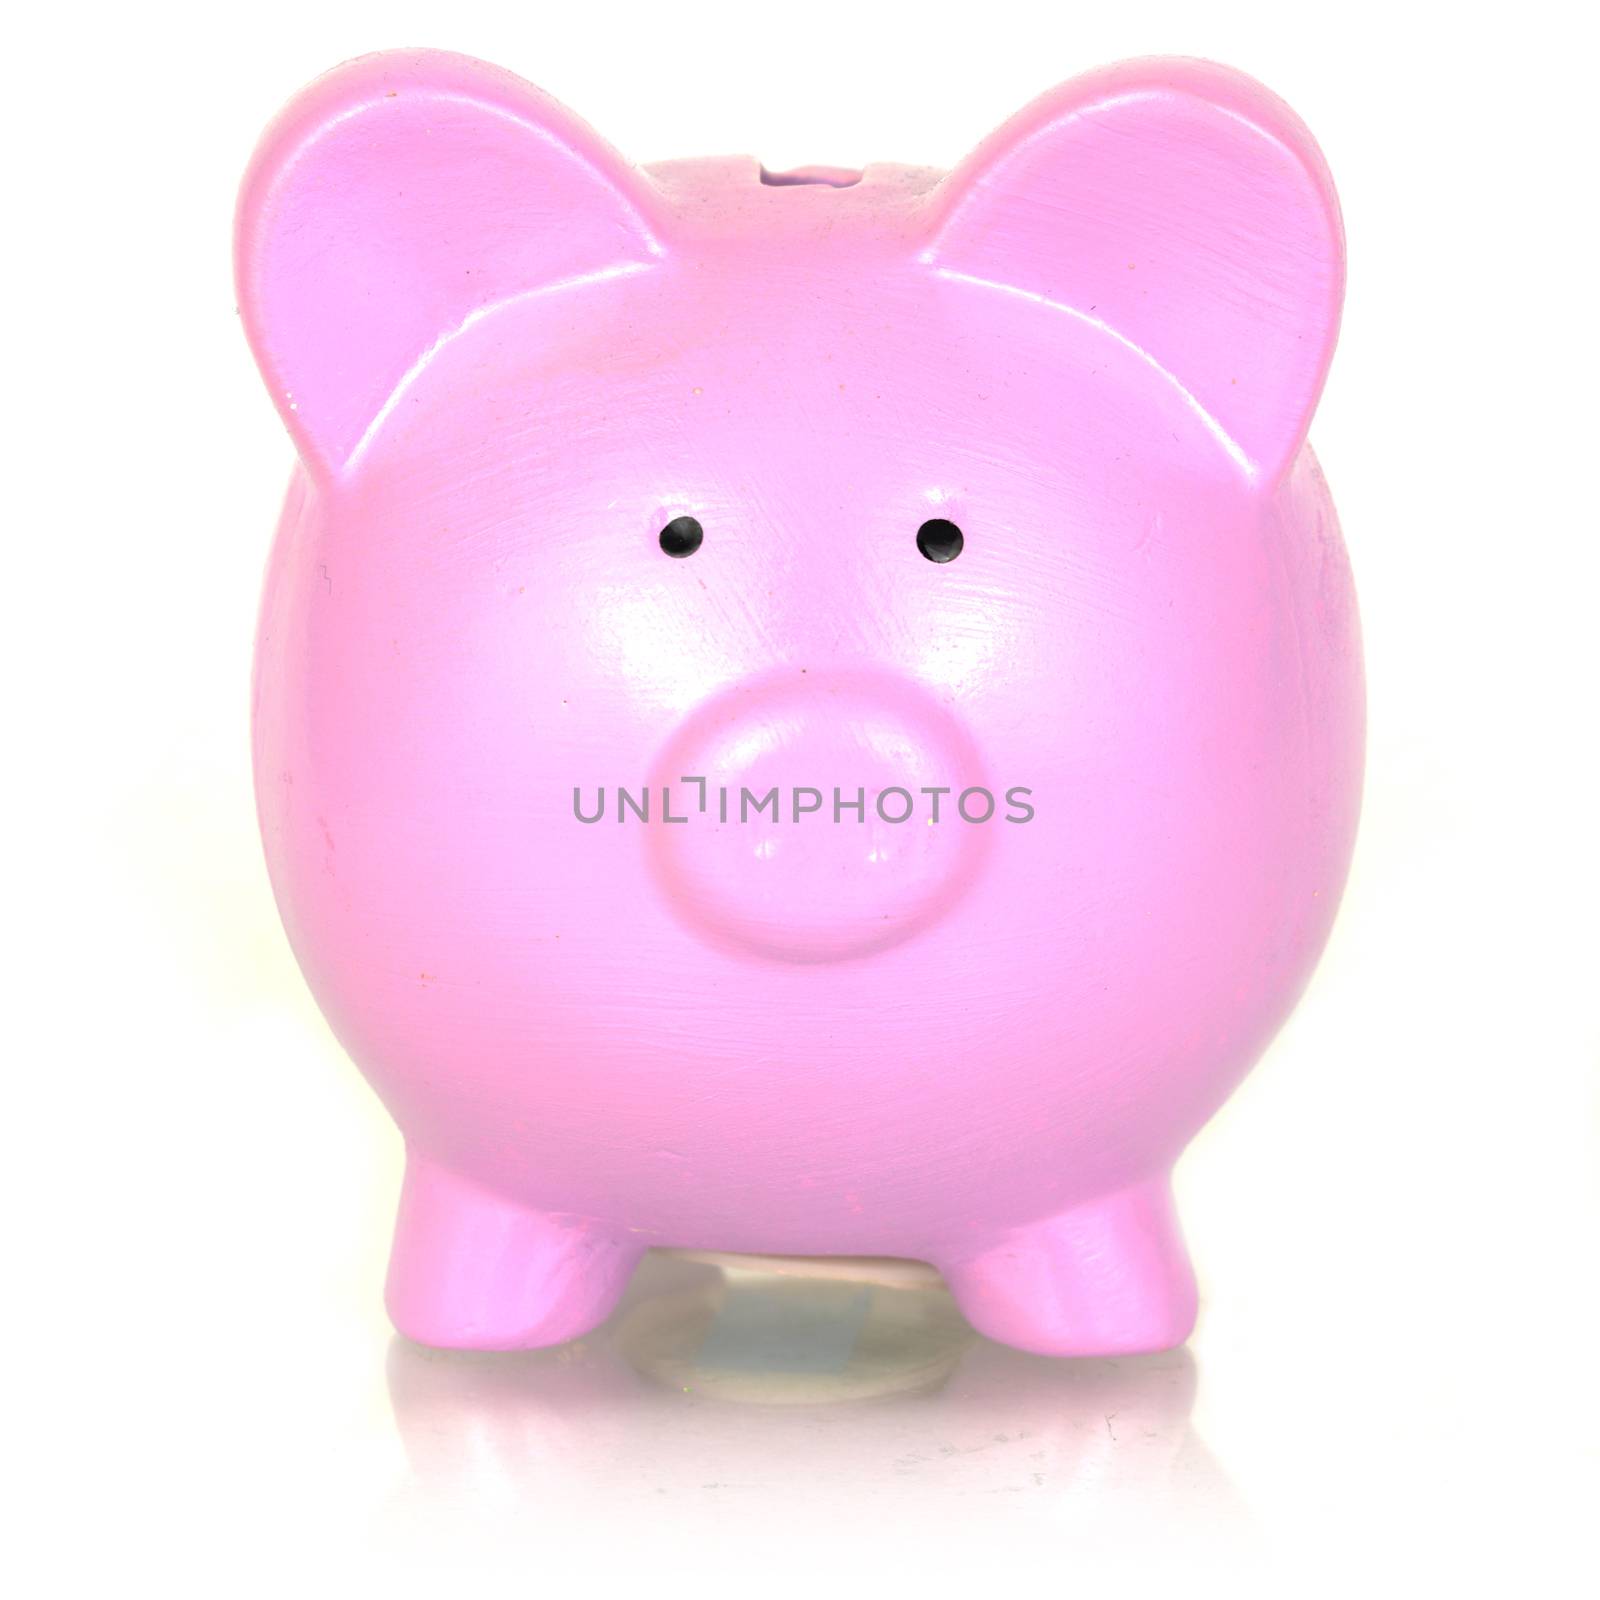 An isolated over white image of a pink piggy bank.